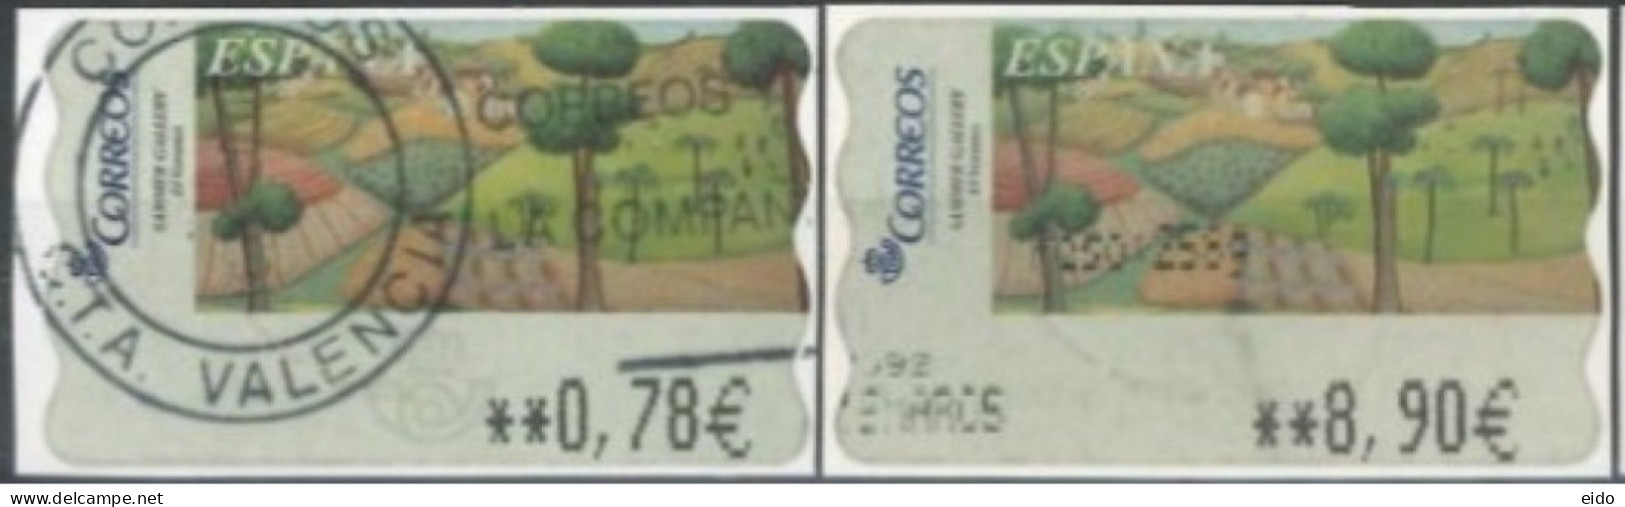 SPAIN - 2005 -  SAMER GALLERY, VERANO STAMPS LABELS SET OF 2 OF DIFFERENT VALUES, USED . - Gebraucht